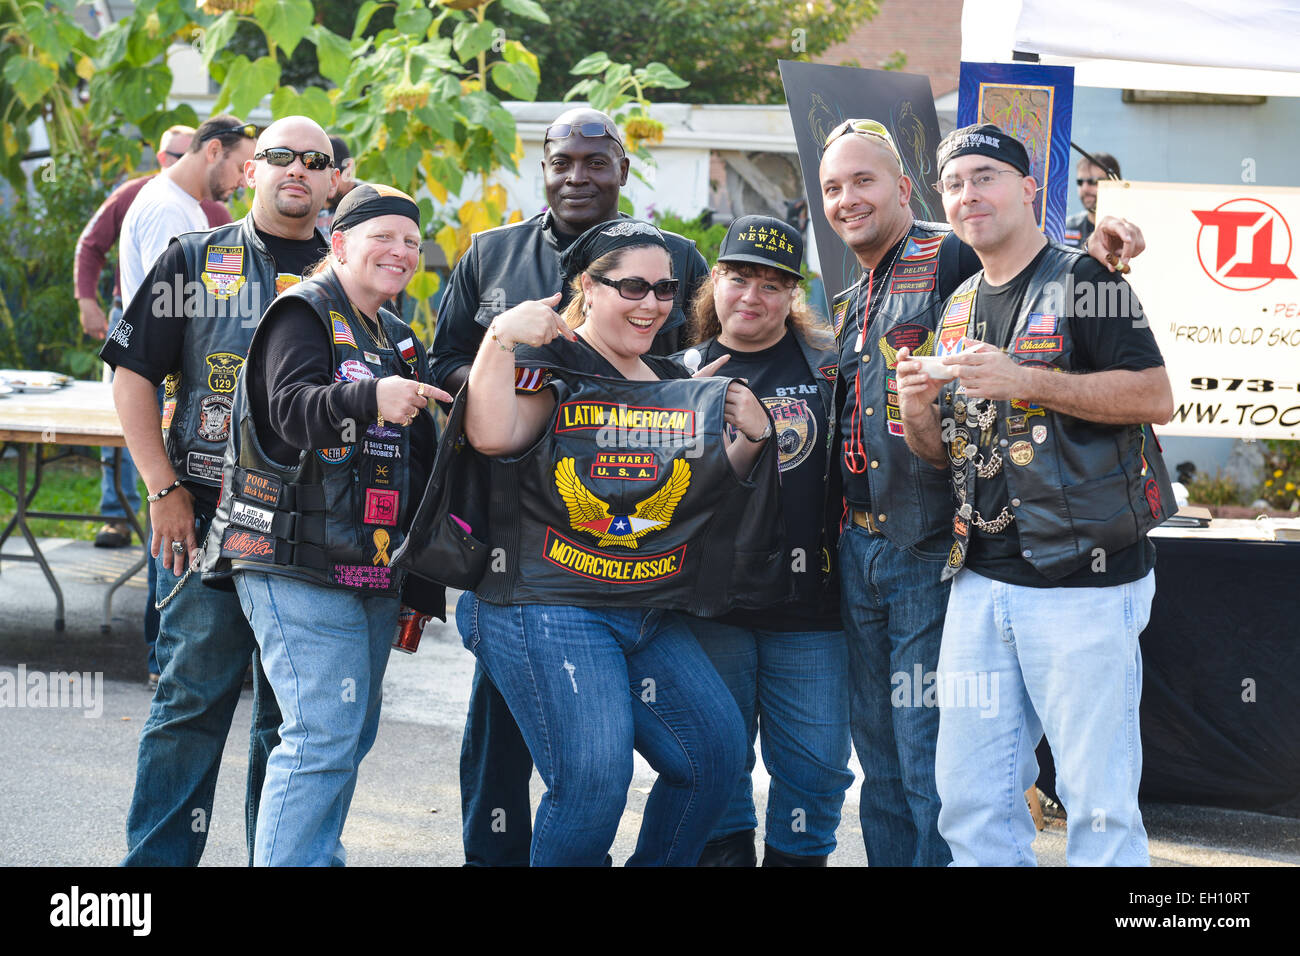 Members of the Latin American Motorcycle Association (Newark, chapter) posing during the Liberty Harley Davidson anniversary. Stock Photo